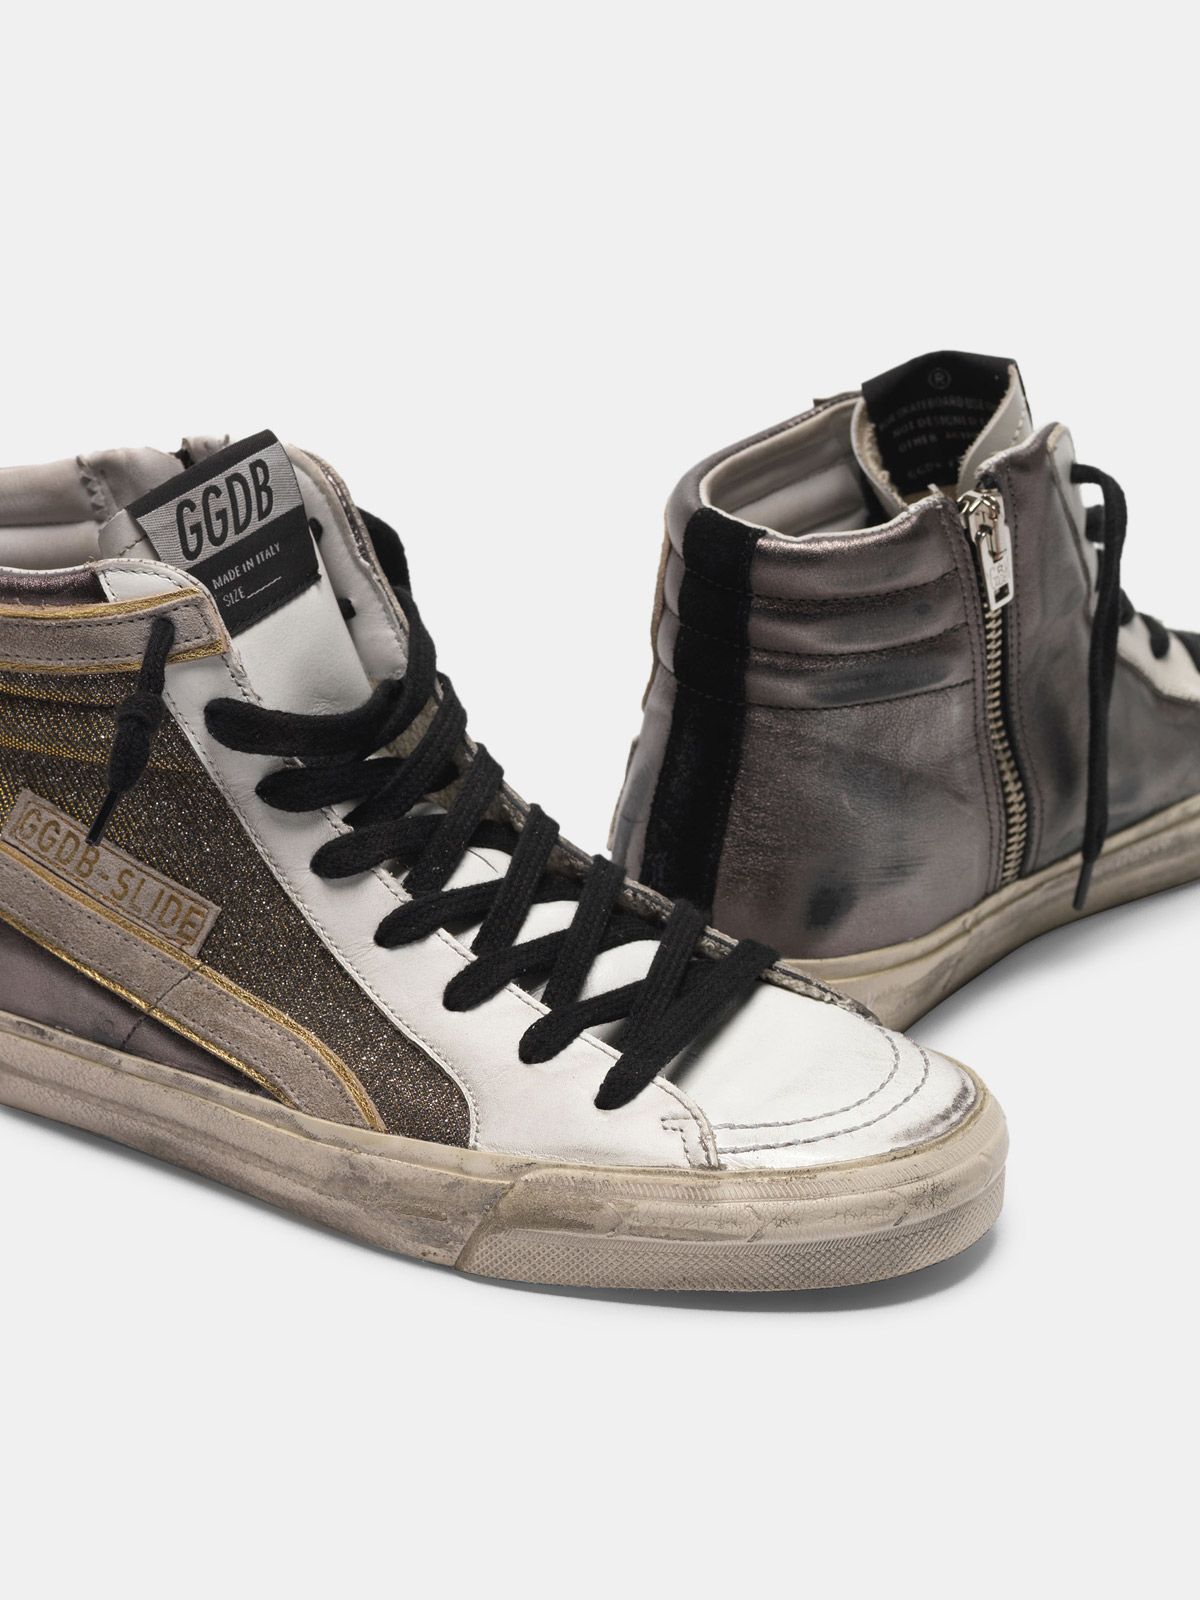 Slide sneakers in metallic leather with shimmer insert | Golden Goose